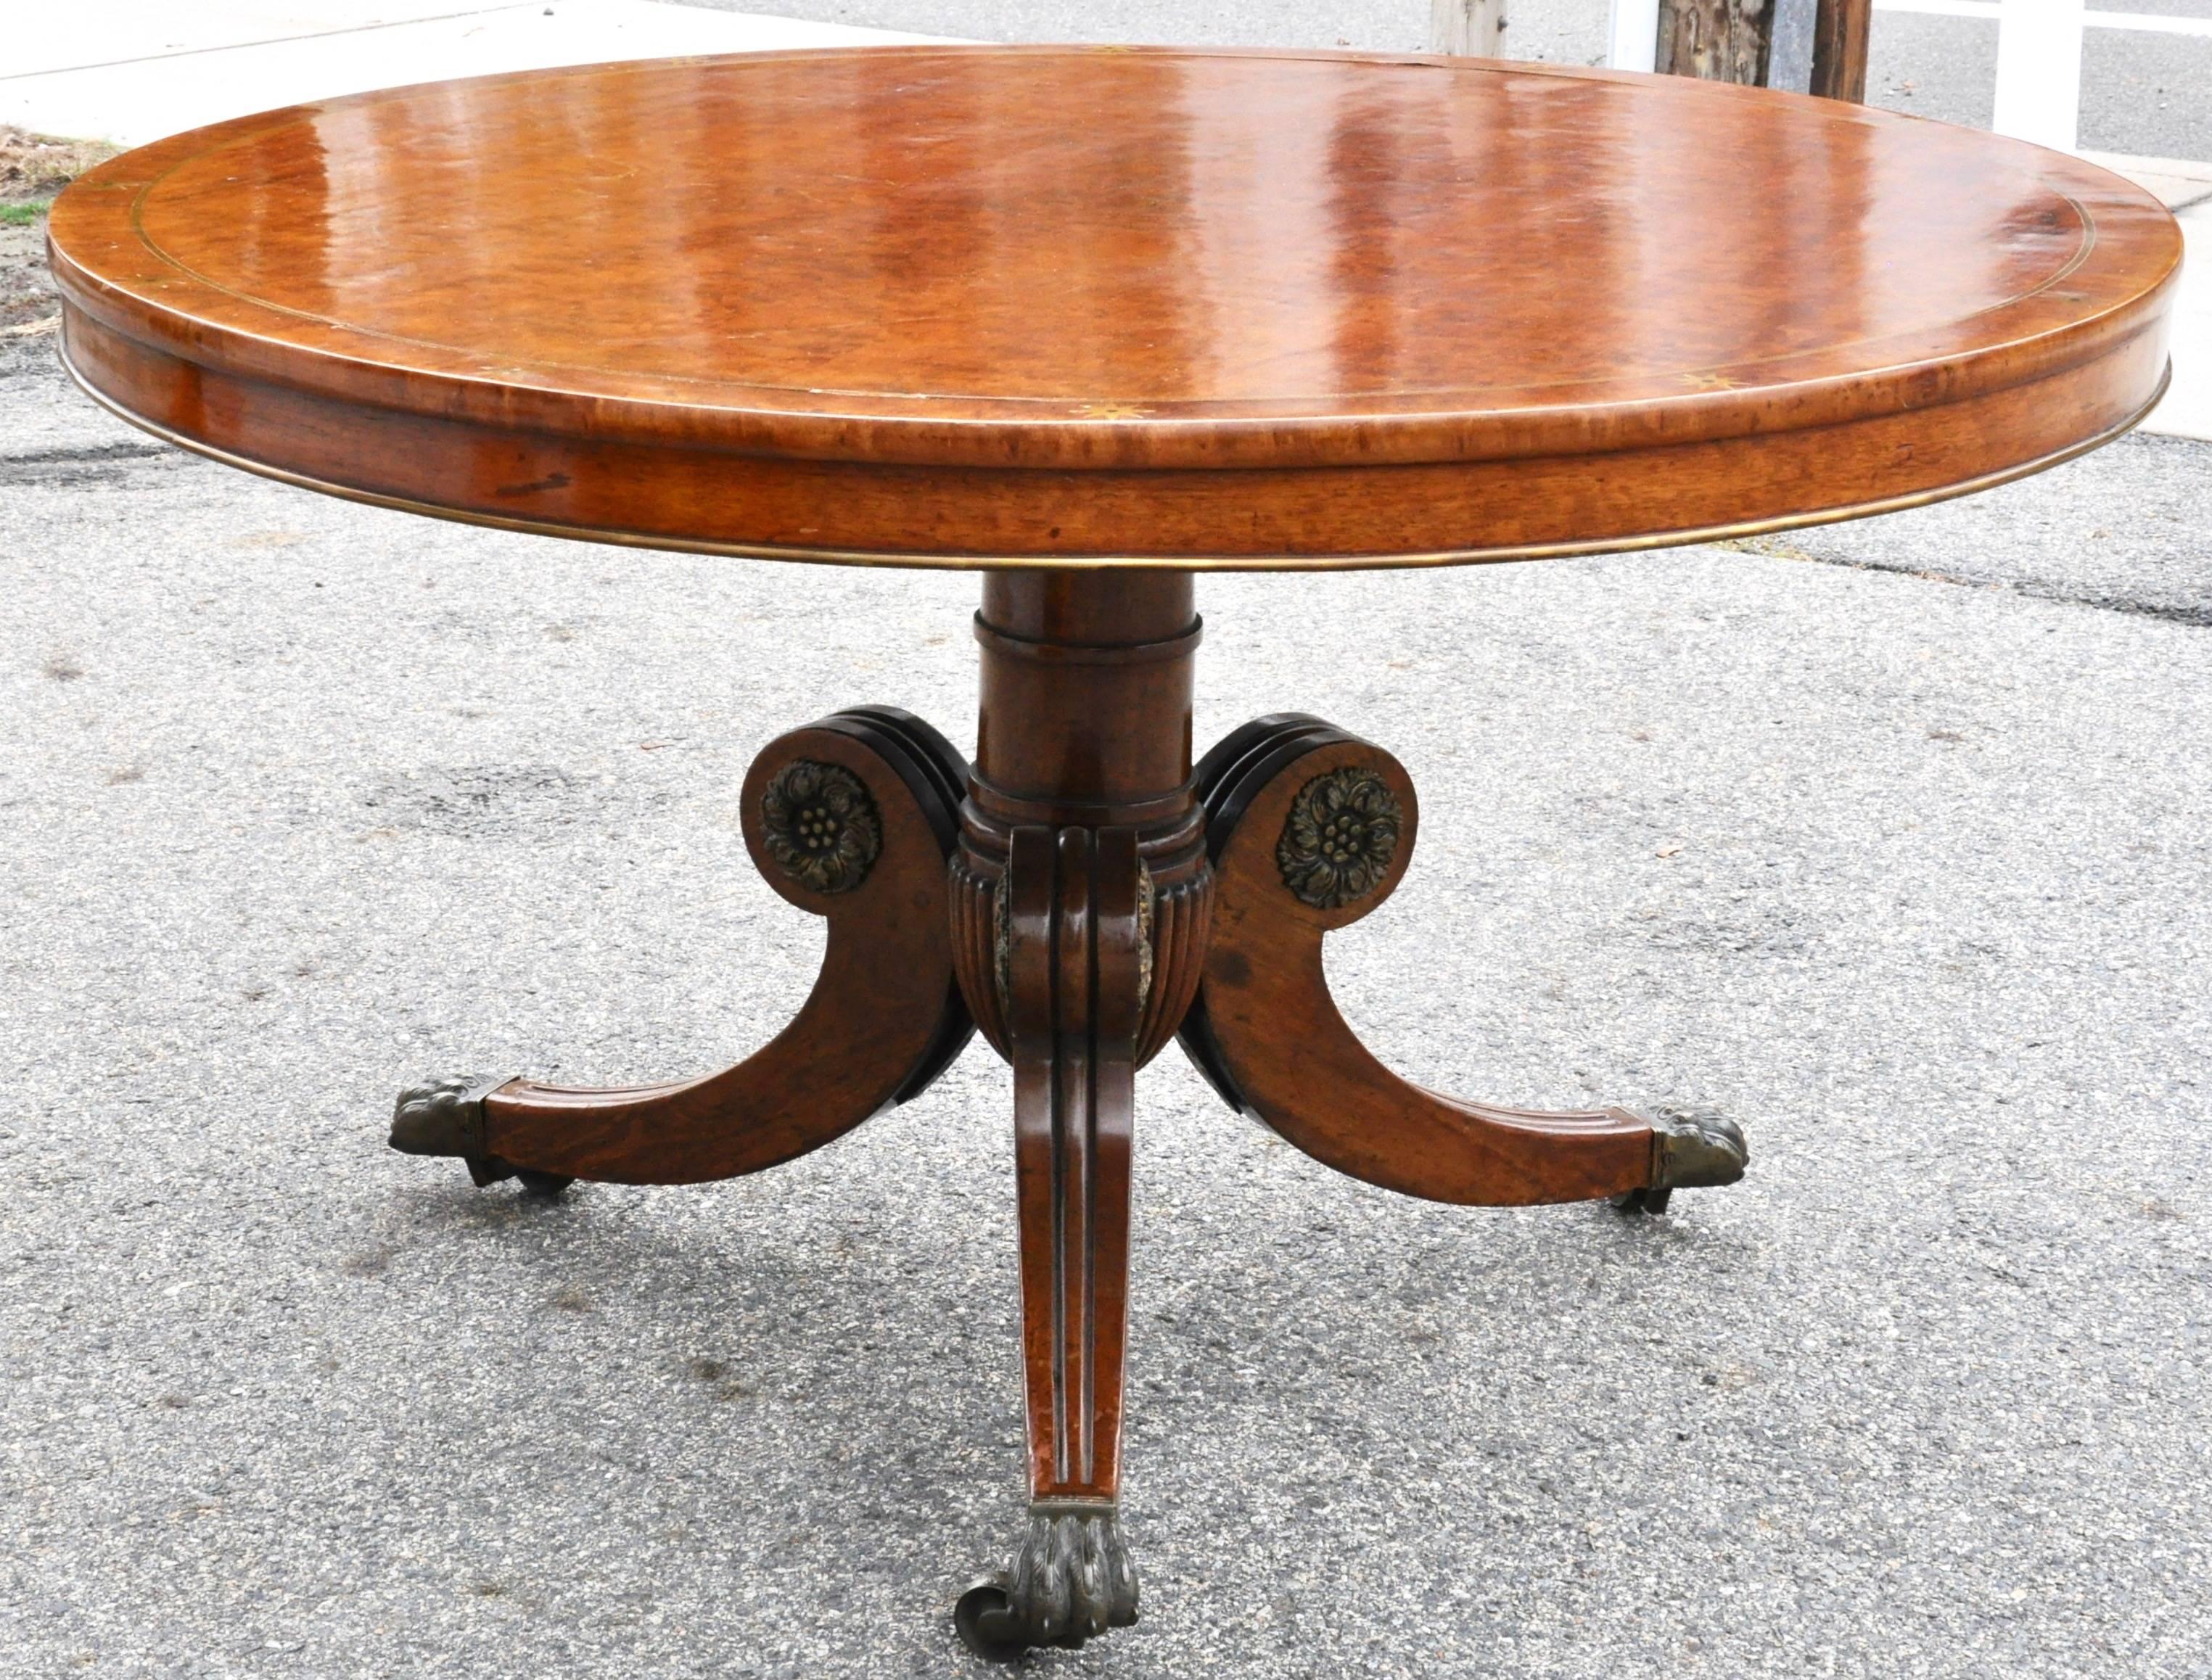 Period Mahogany Regency Center Table or Round Dining Table
--Great Color and Patina
--Brass Banding and Star Inlay
--Robust Legs with Original Rosettes